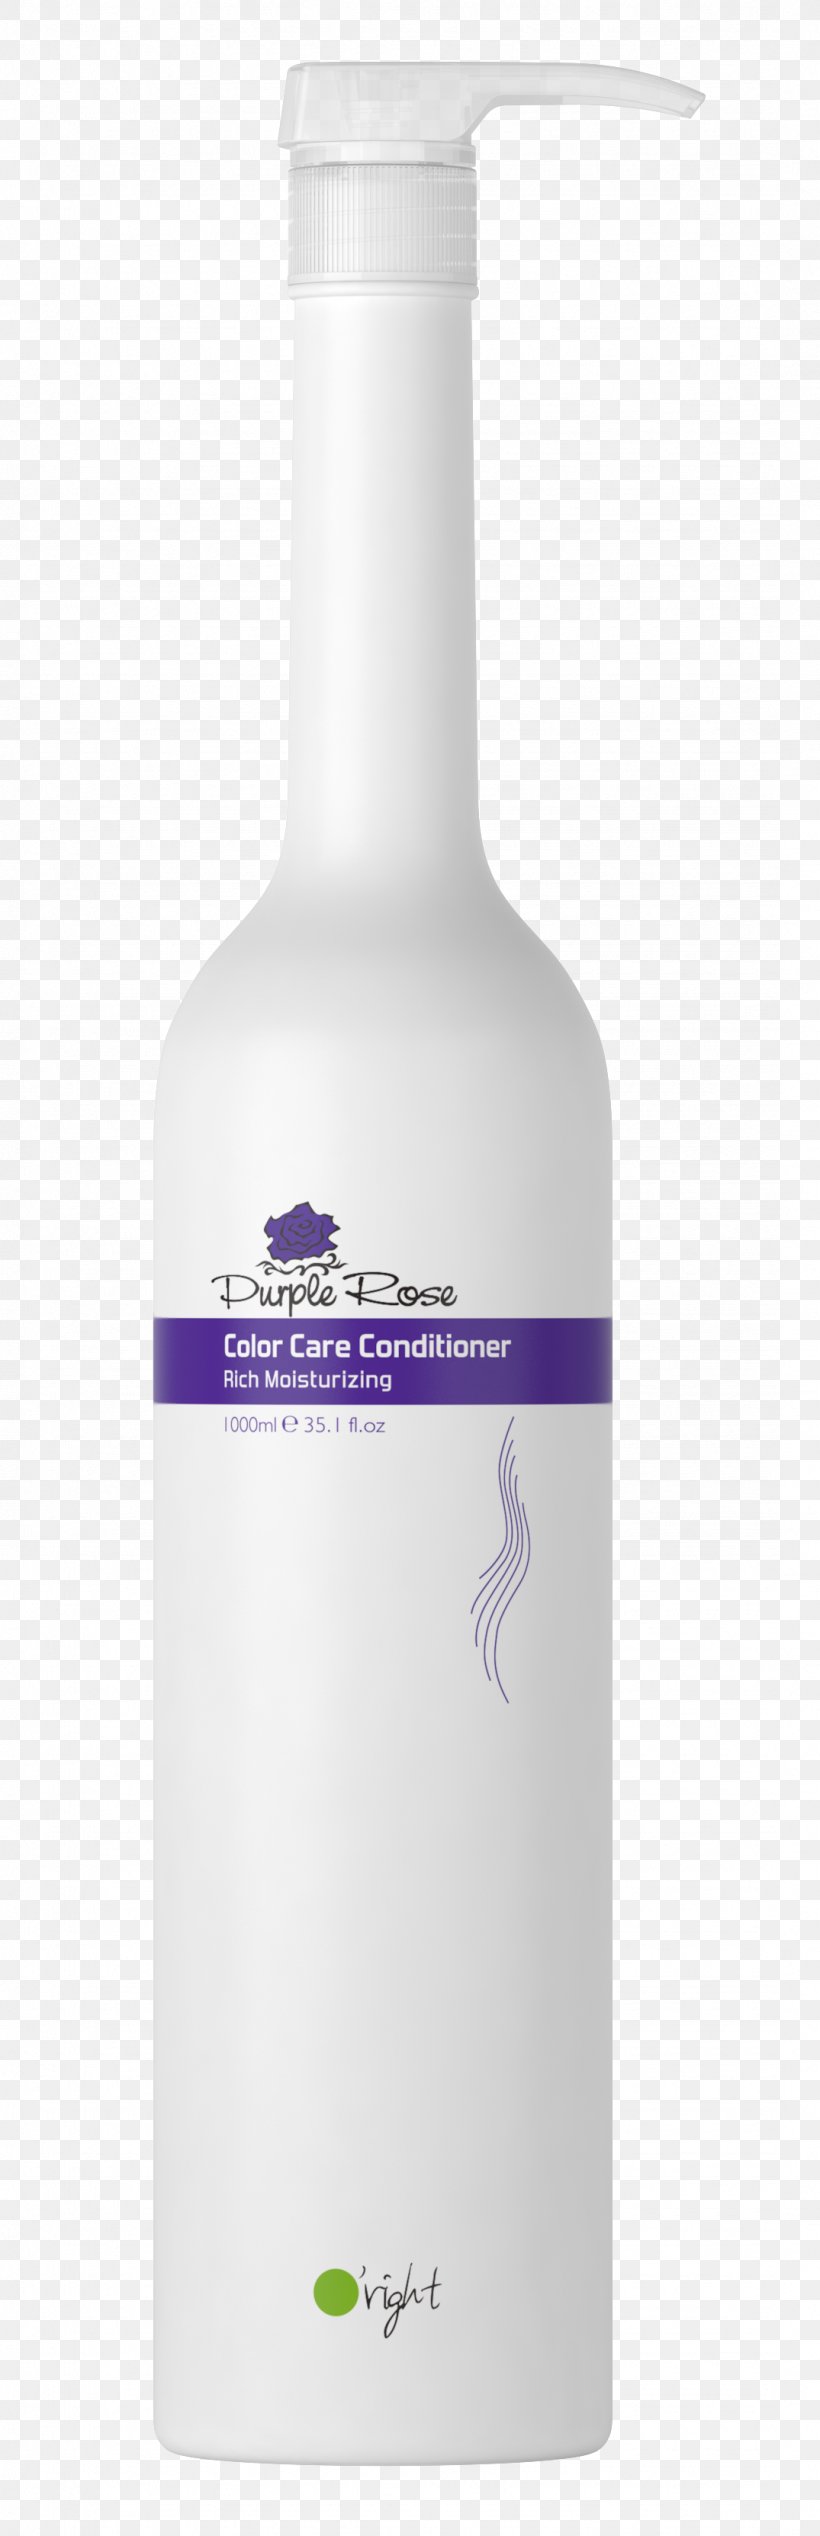 Lotion Bottle, PNG, 1075x3325px, Lotion, Bottle, Liquid, Skin Care Download Free